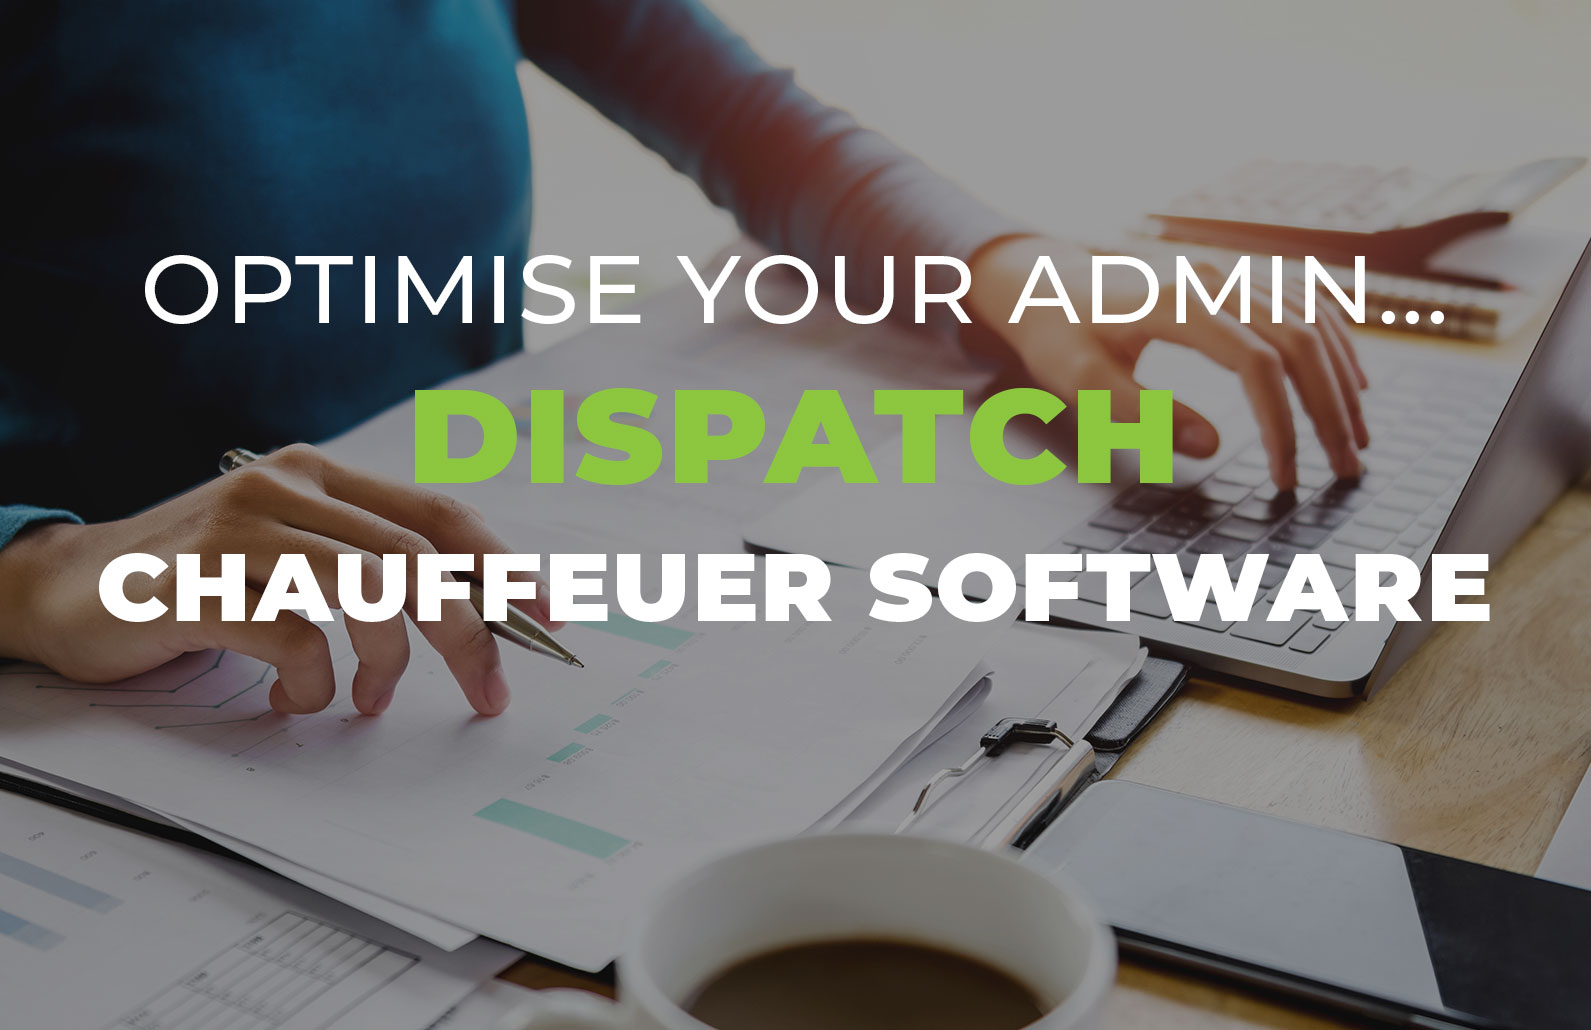 Chauffeur Software to Optimise your Admin